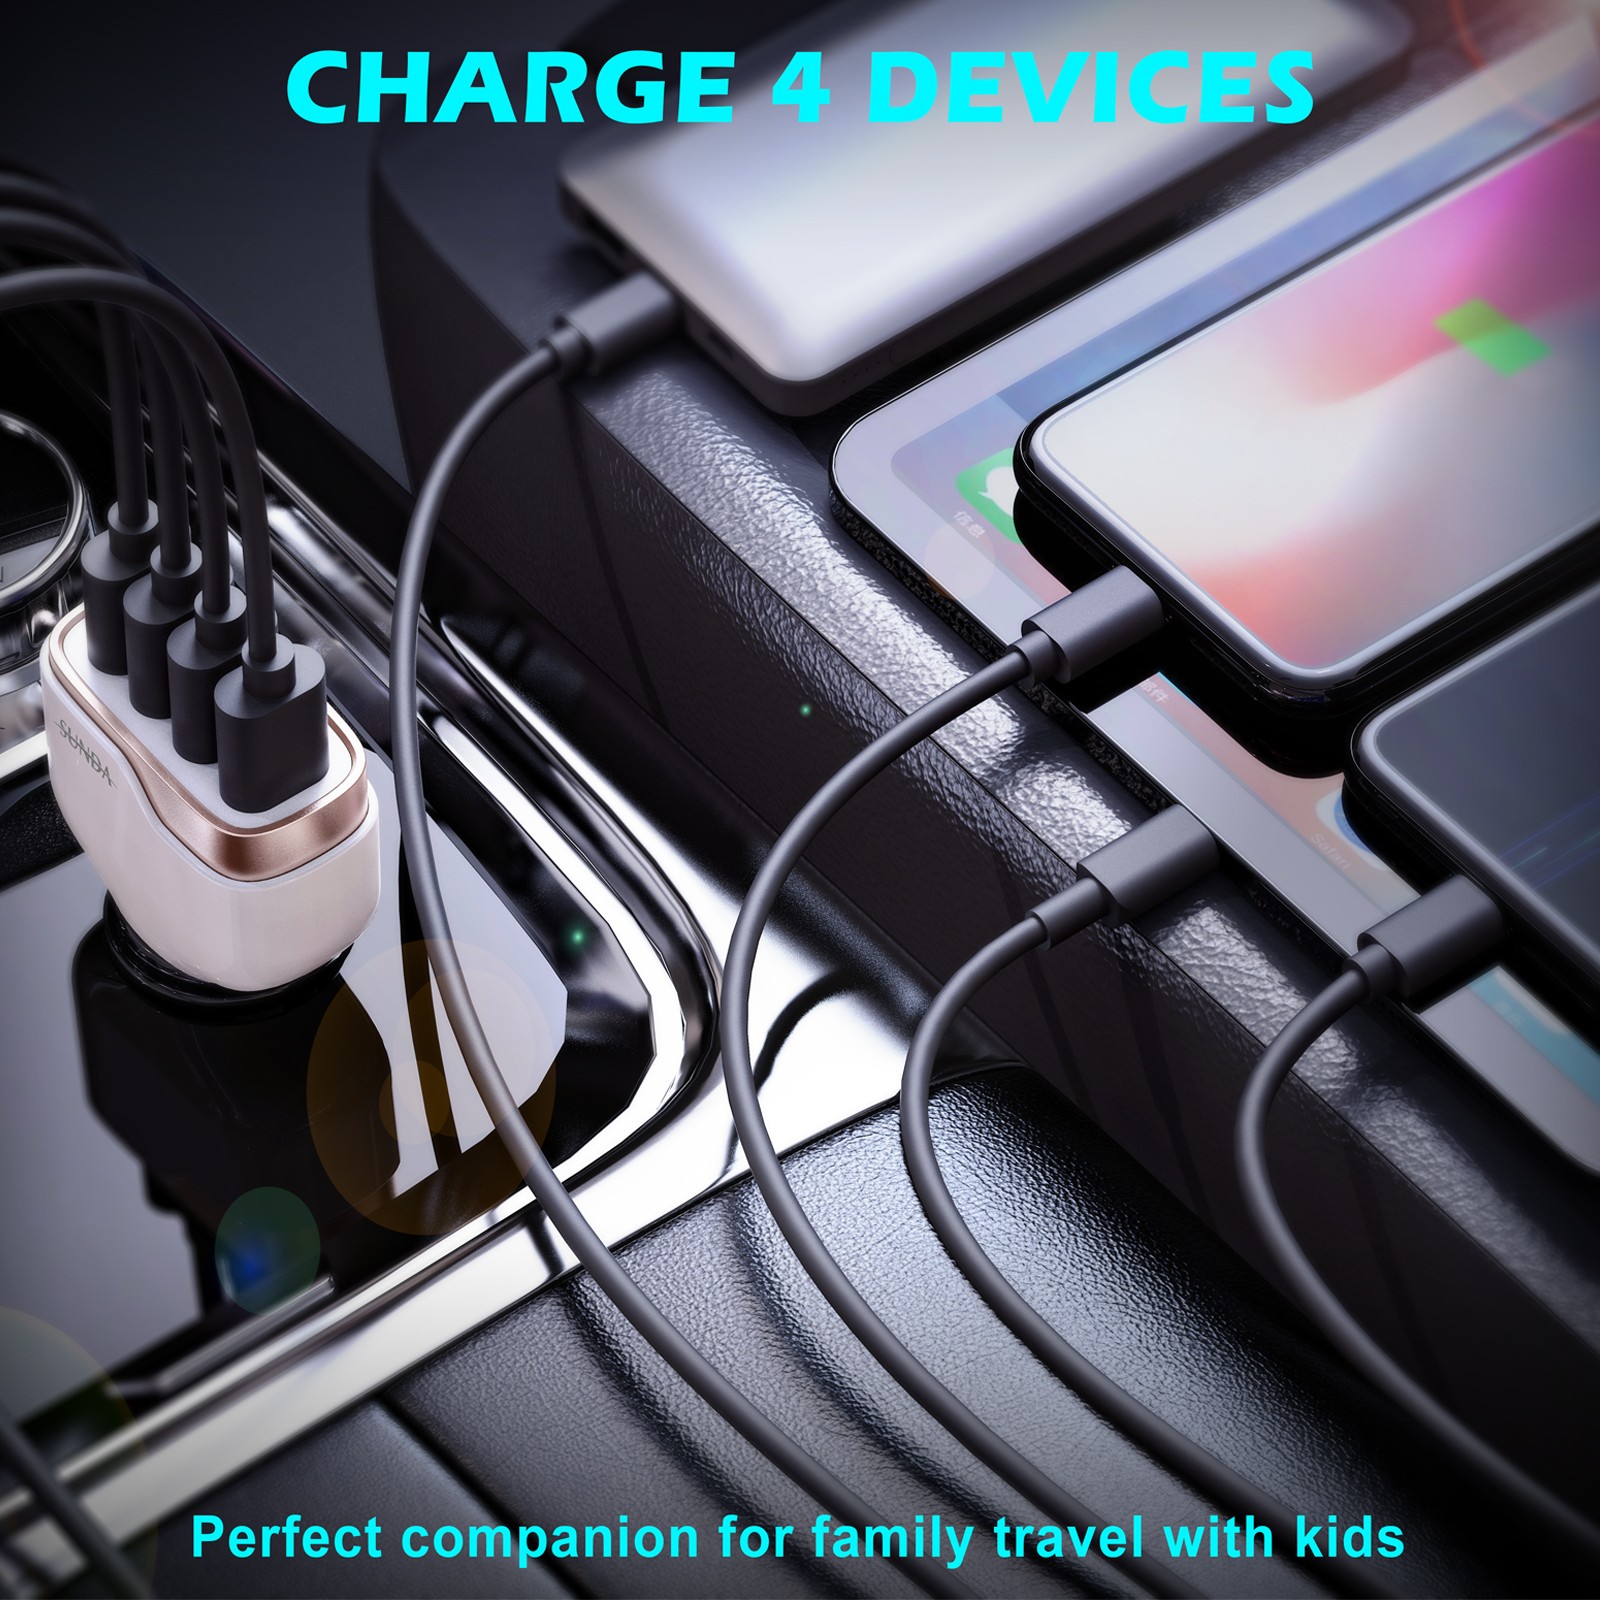 Best Four Ports 48W In Car Phone Charger